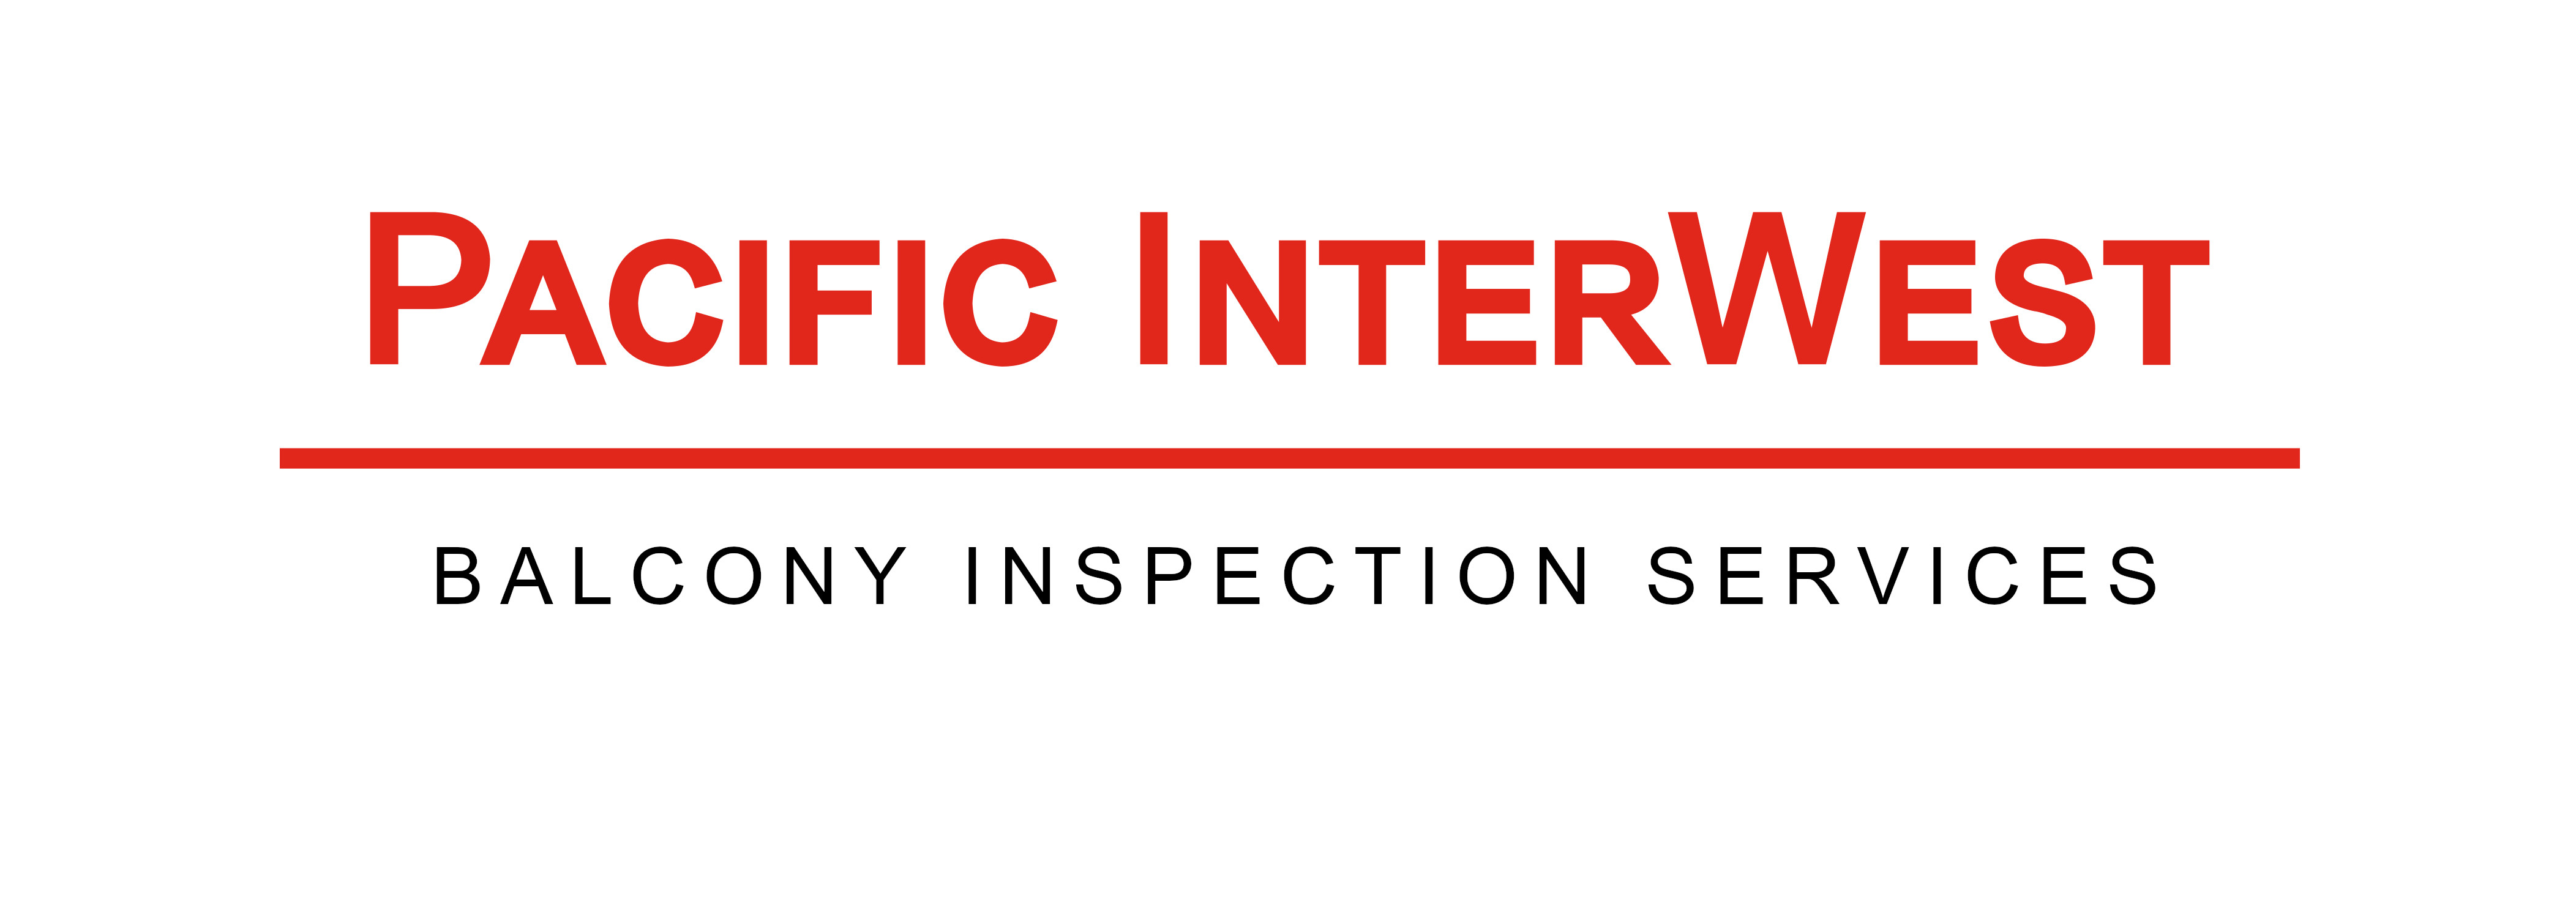 Pacific InterWest Balcony Inspection Services